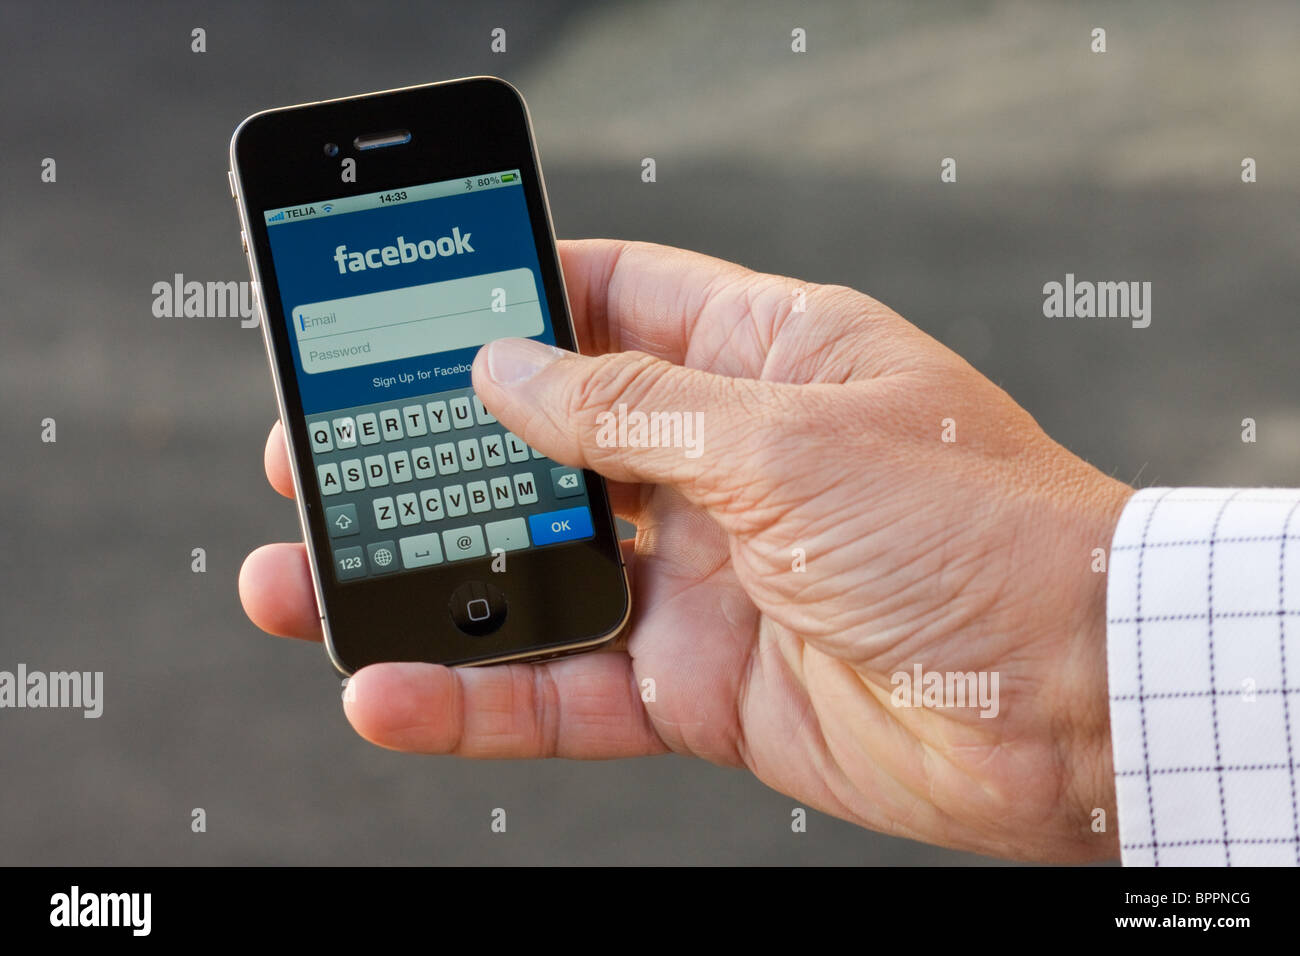 The iPhone 4 in the palm of a hand of a man, showing the Facebook app login. Stock Photo